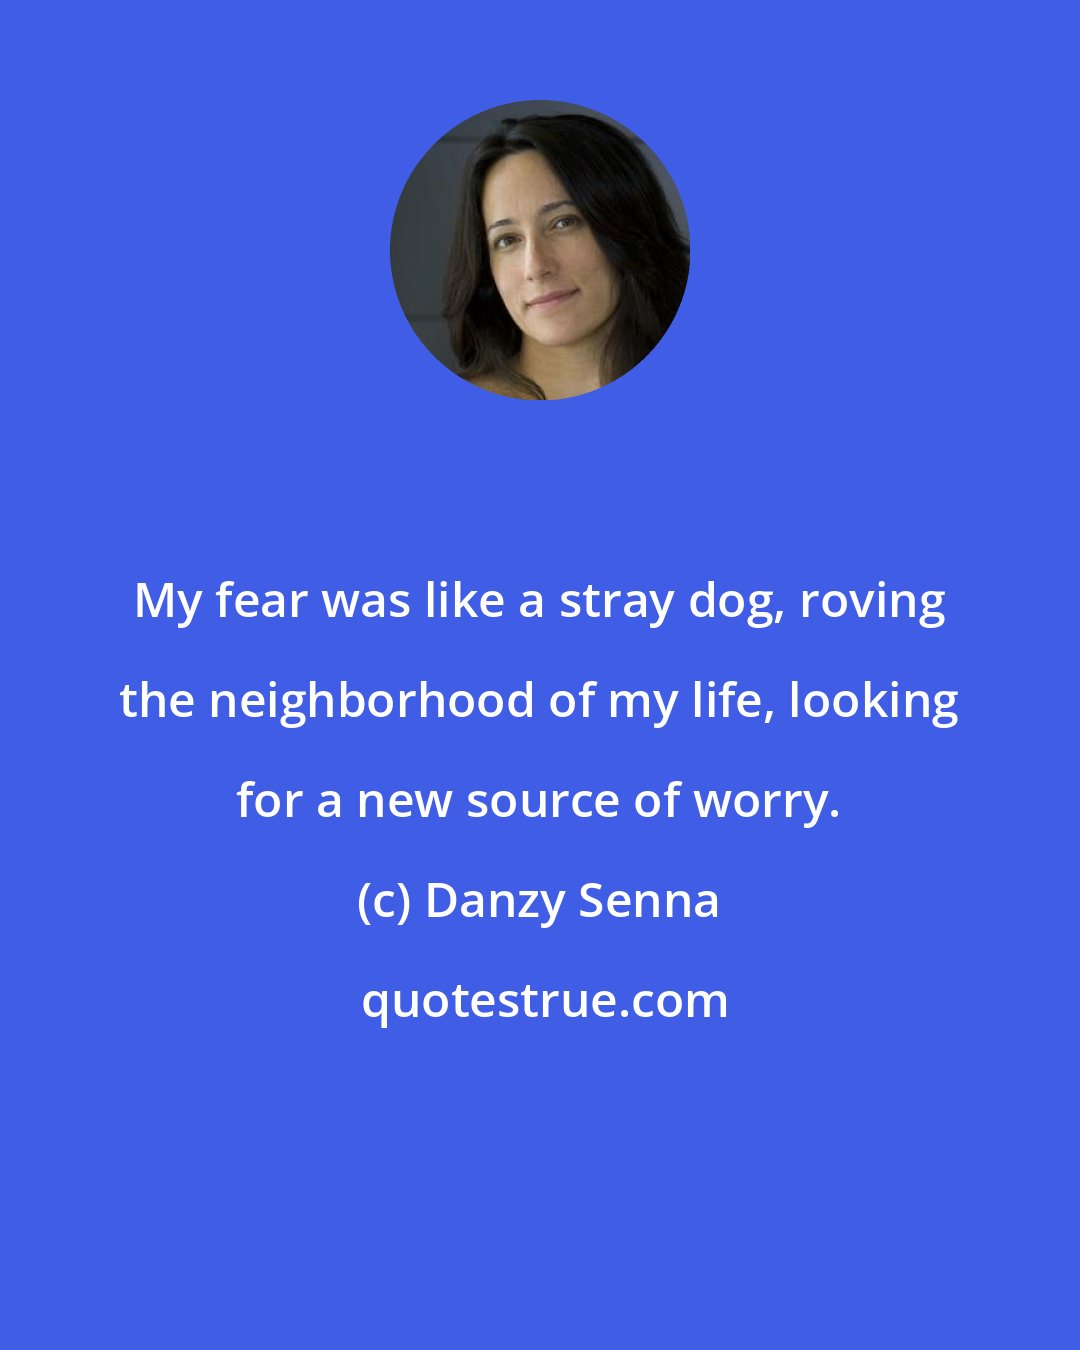 Danzy Senna: My fear was like a stray dog, roving the neighborhood of my life, looking for a new source of worry.